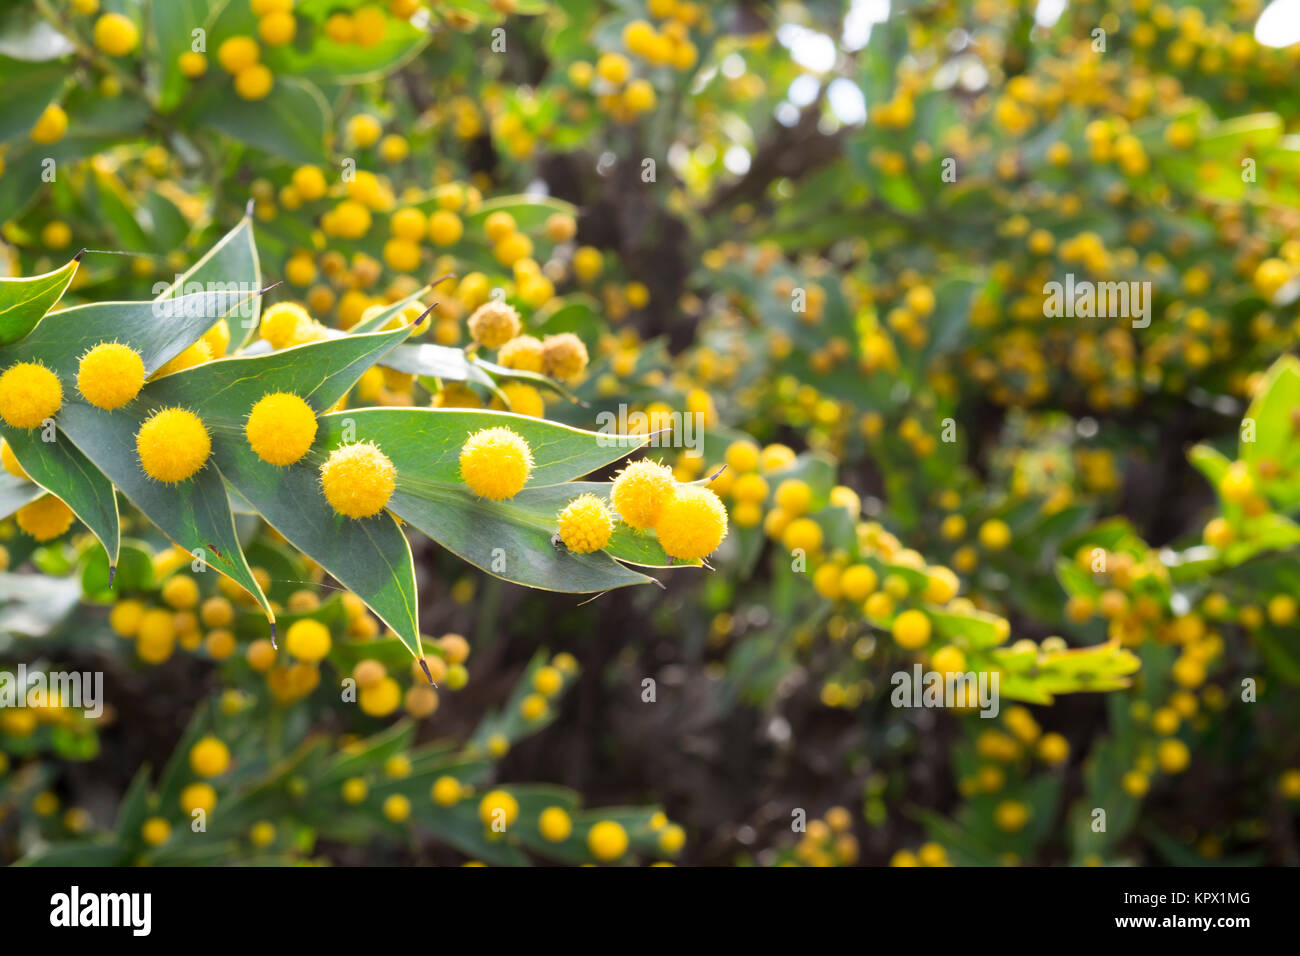 The vibrant yellow balls and unusual foliage leaves of the Acacia Glaucoptera (Flat Wattle), also known as Clay Wattle. Native to Western Australia. Stock Photo